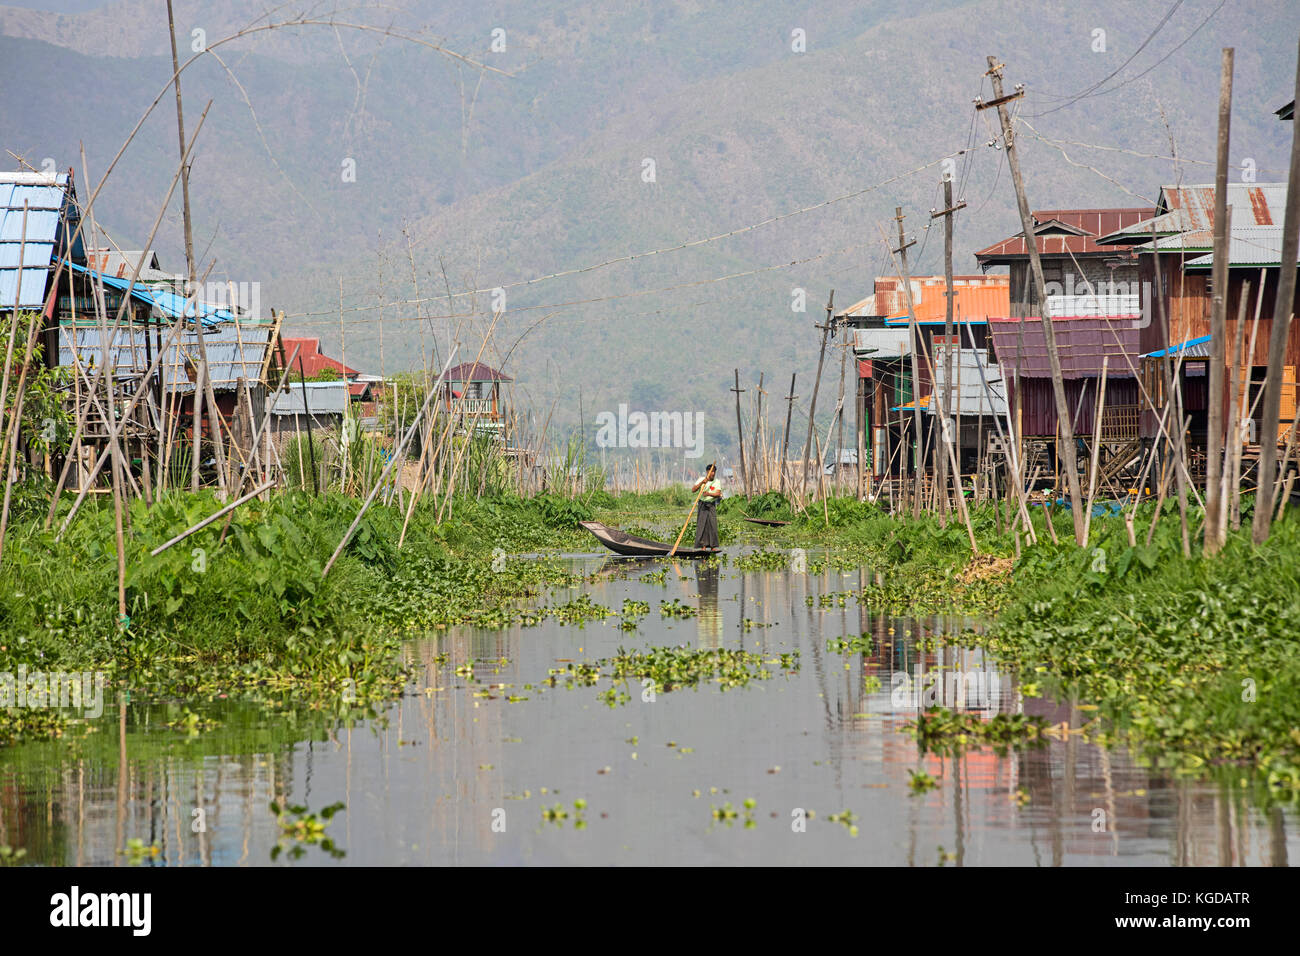 Traditional wooden houses on stilts in Inle Lake, Nyaungshwe, Shan State, Myanmar / Burma Stock Photo